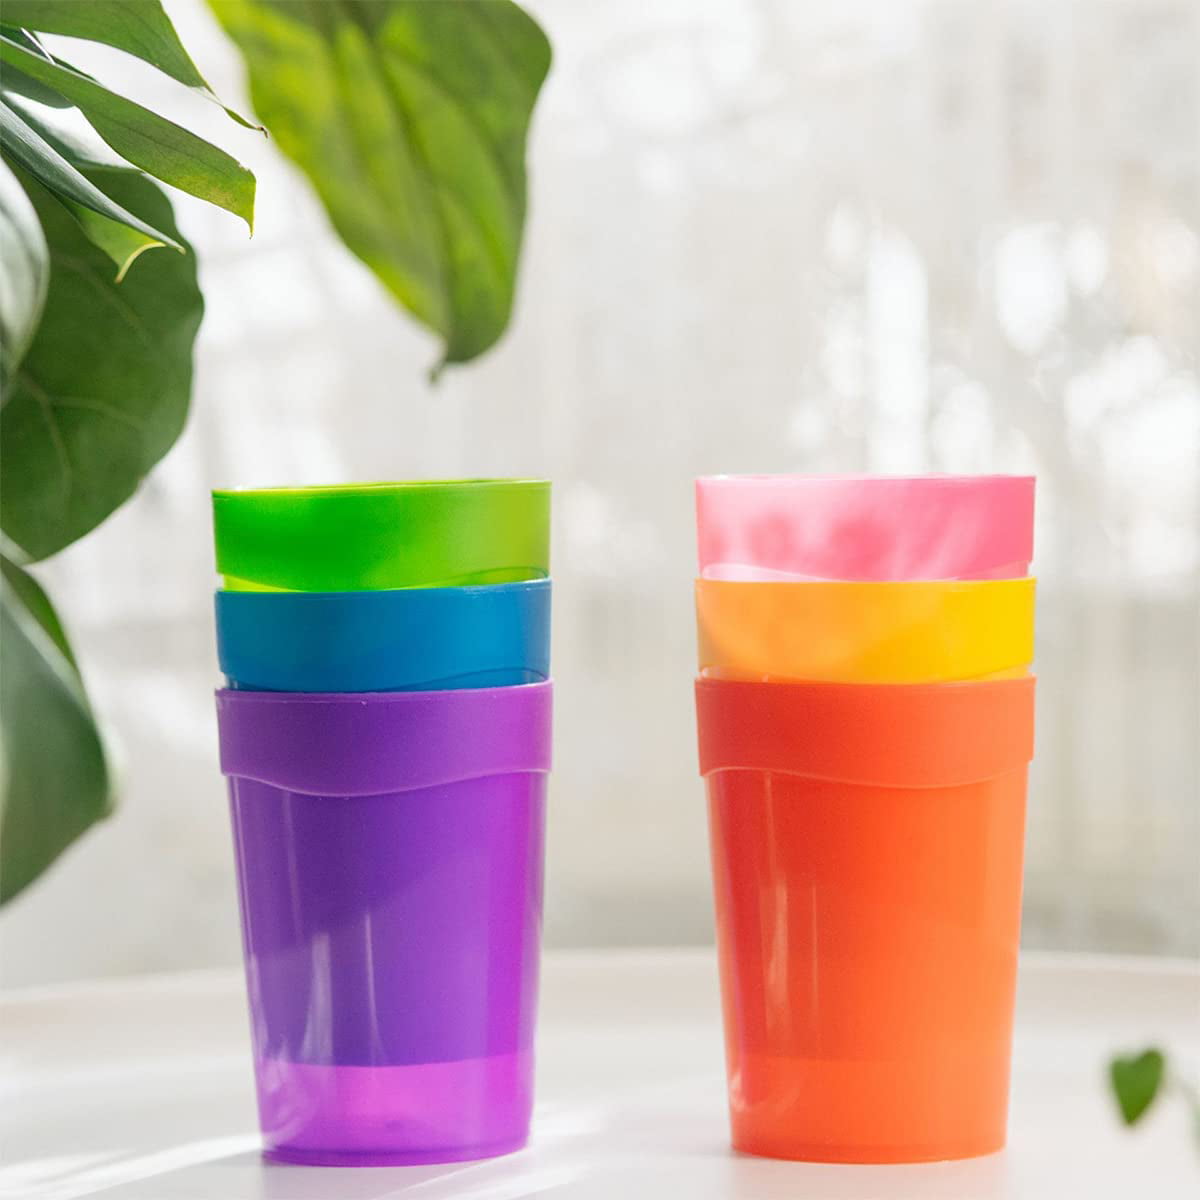 Triani Unbreakable Reusable Drinking Cup for Adult Kids(13.5 OZ), Plastic  Tumblers Set of 12 in 6 Colors-Dishwasher Safe